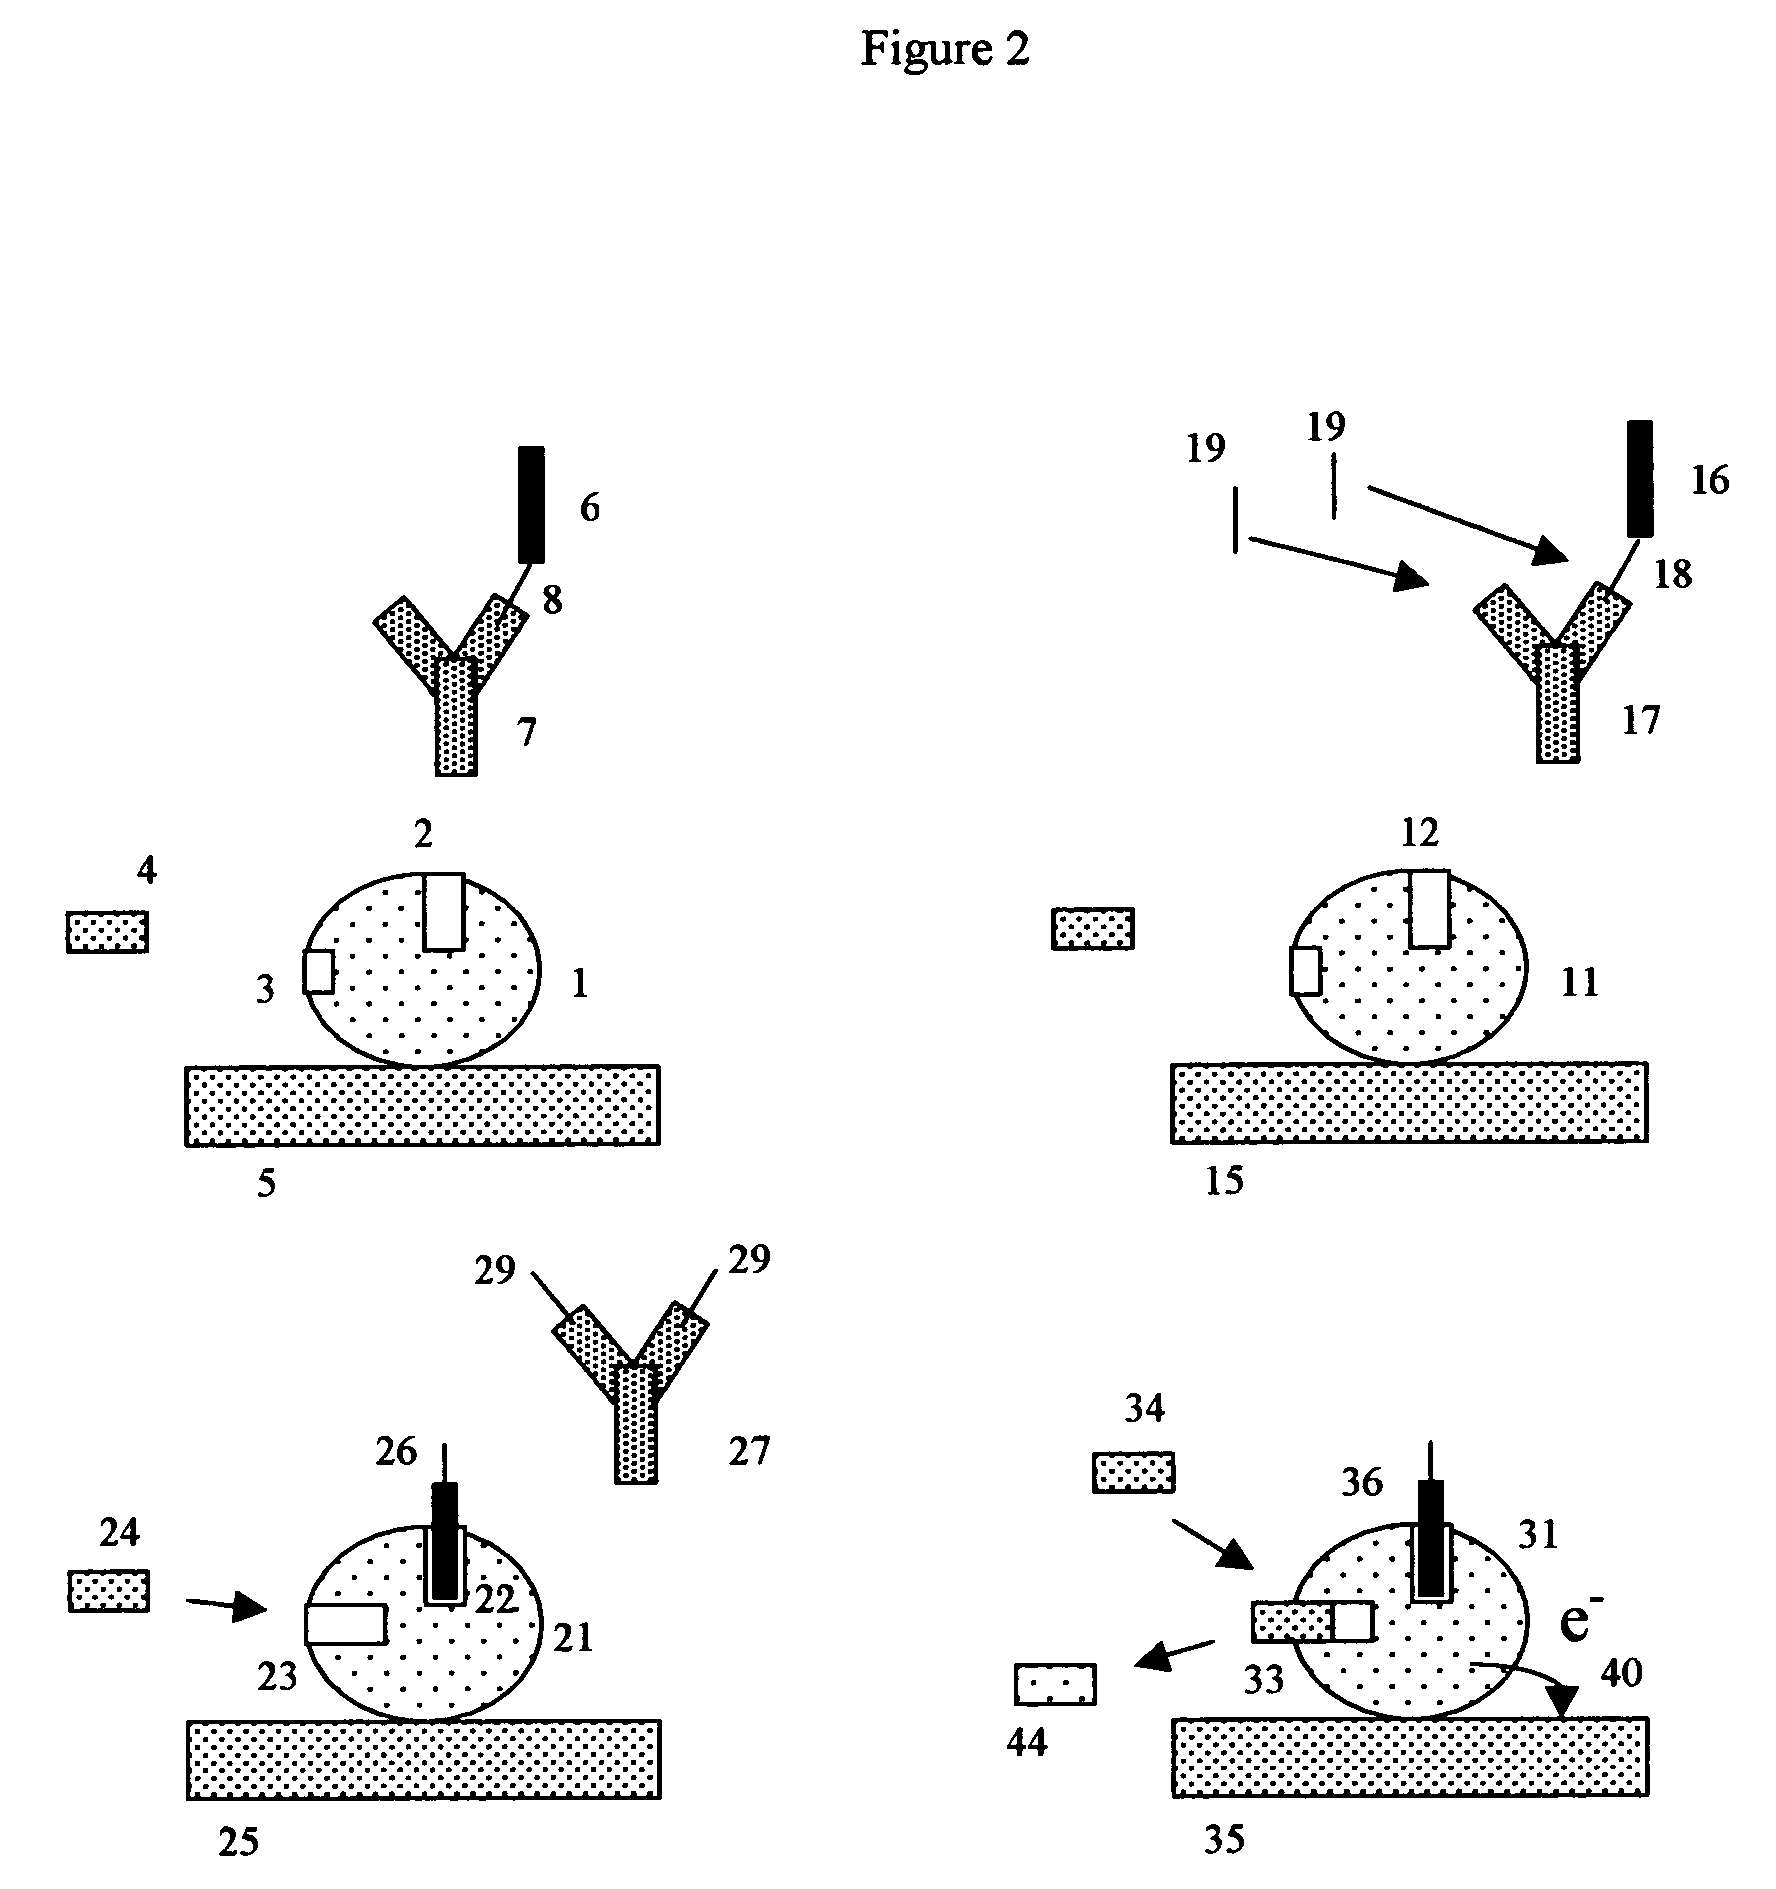 Apoenzyme reactivation electrochemical detection method and assay